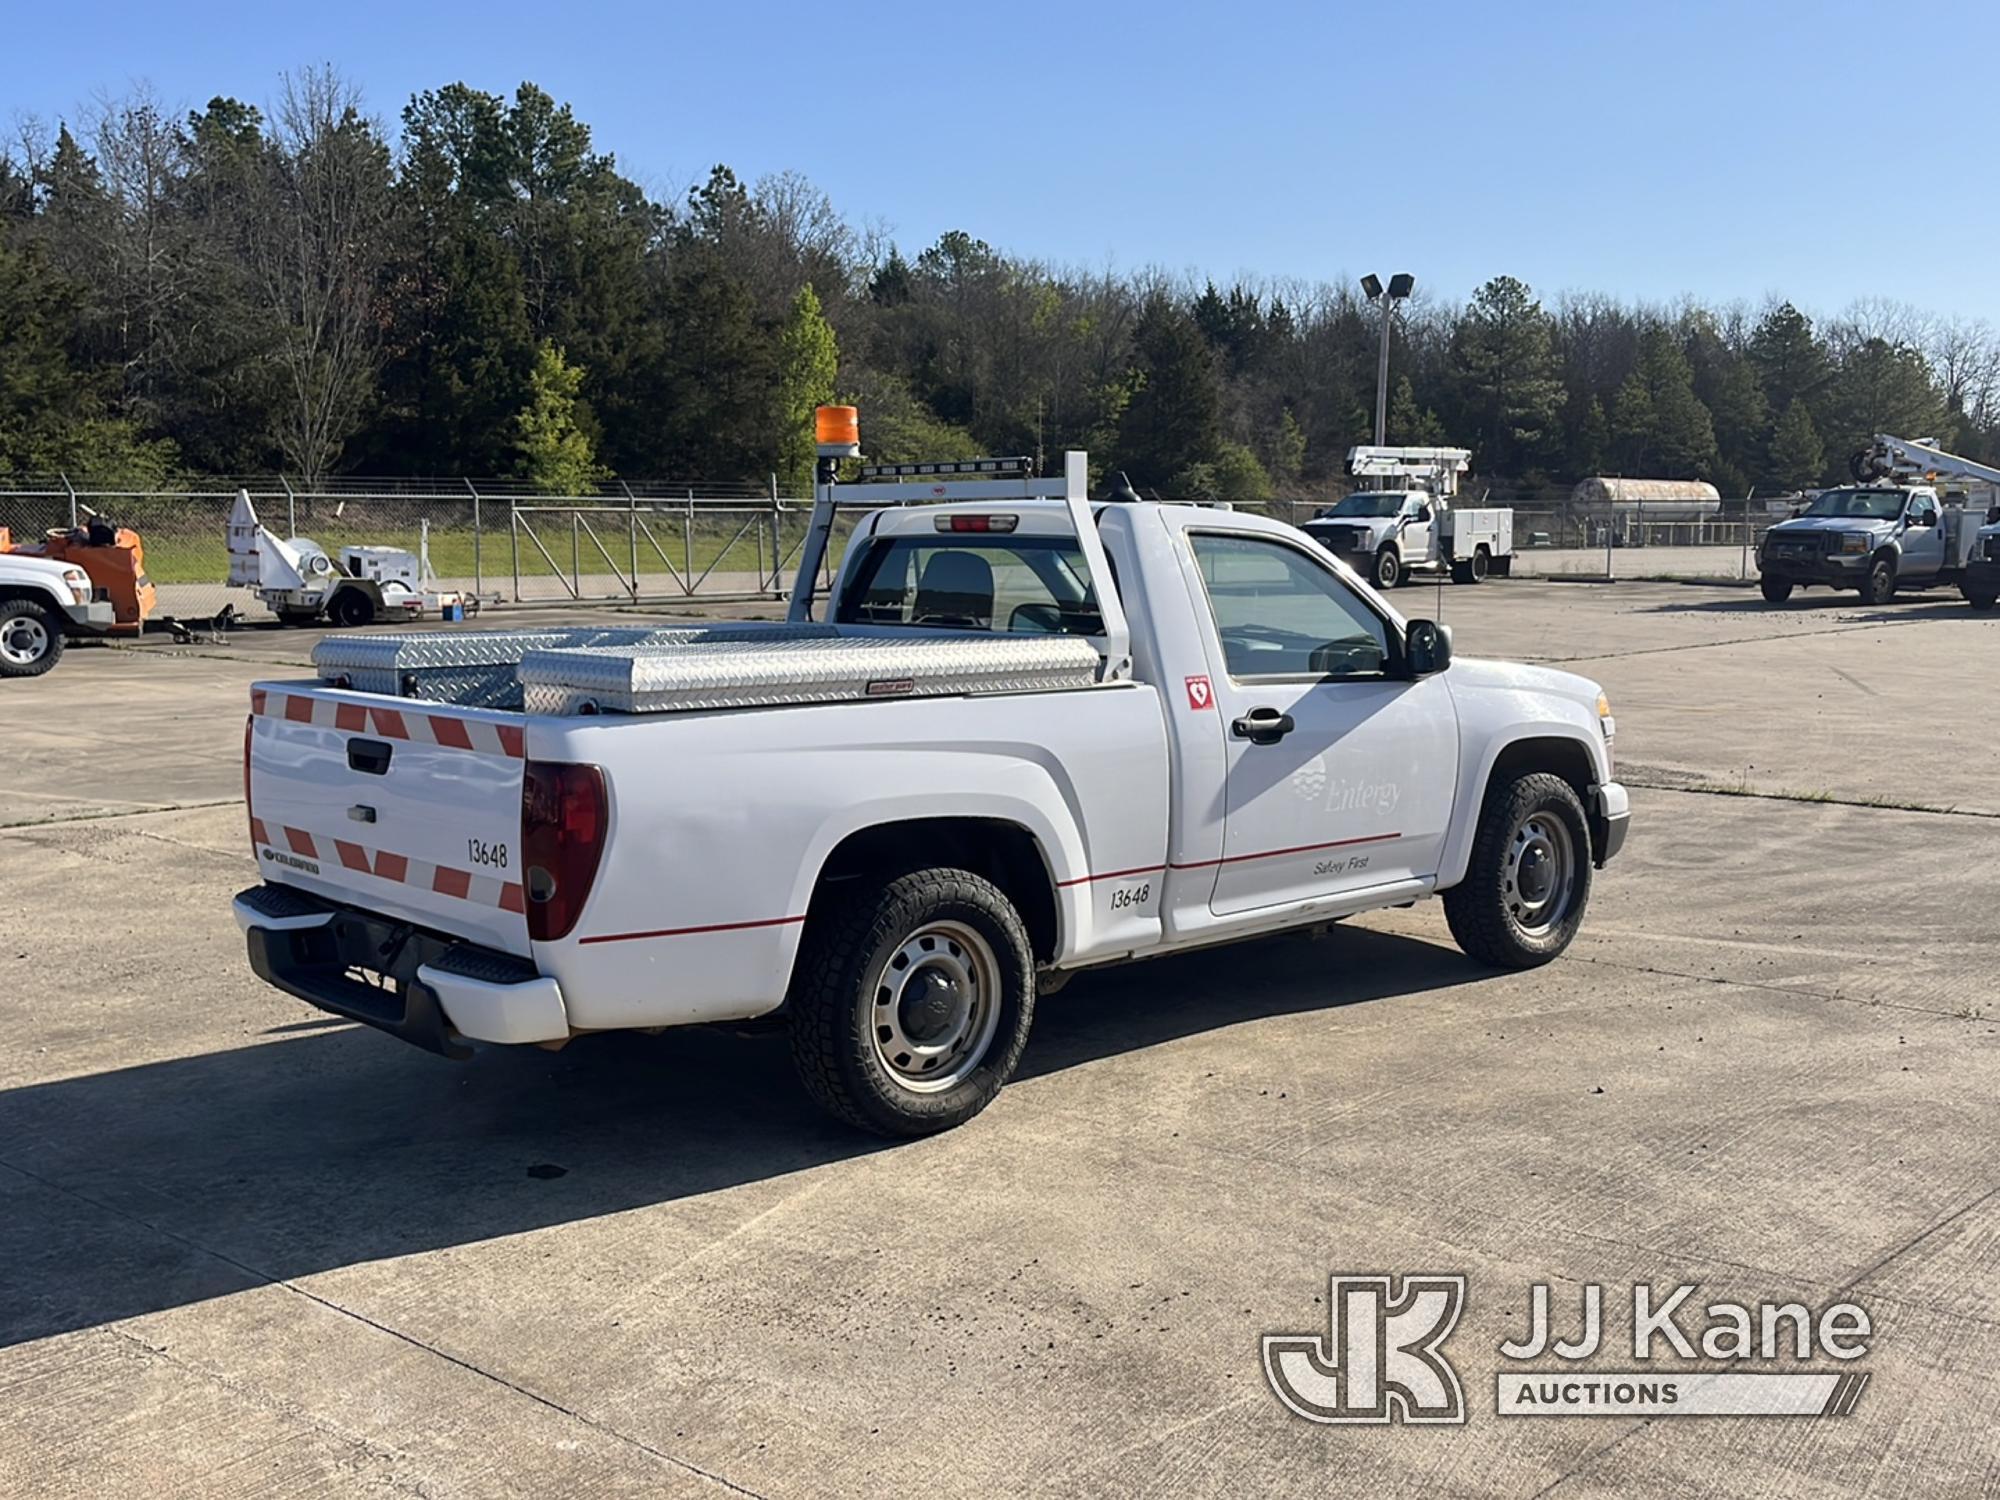 (Conway, AR) 2012 Chevrolet Colorado Pickup Truck Runs & Moves) (Jump to Start) (Check Engine Light